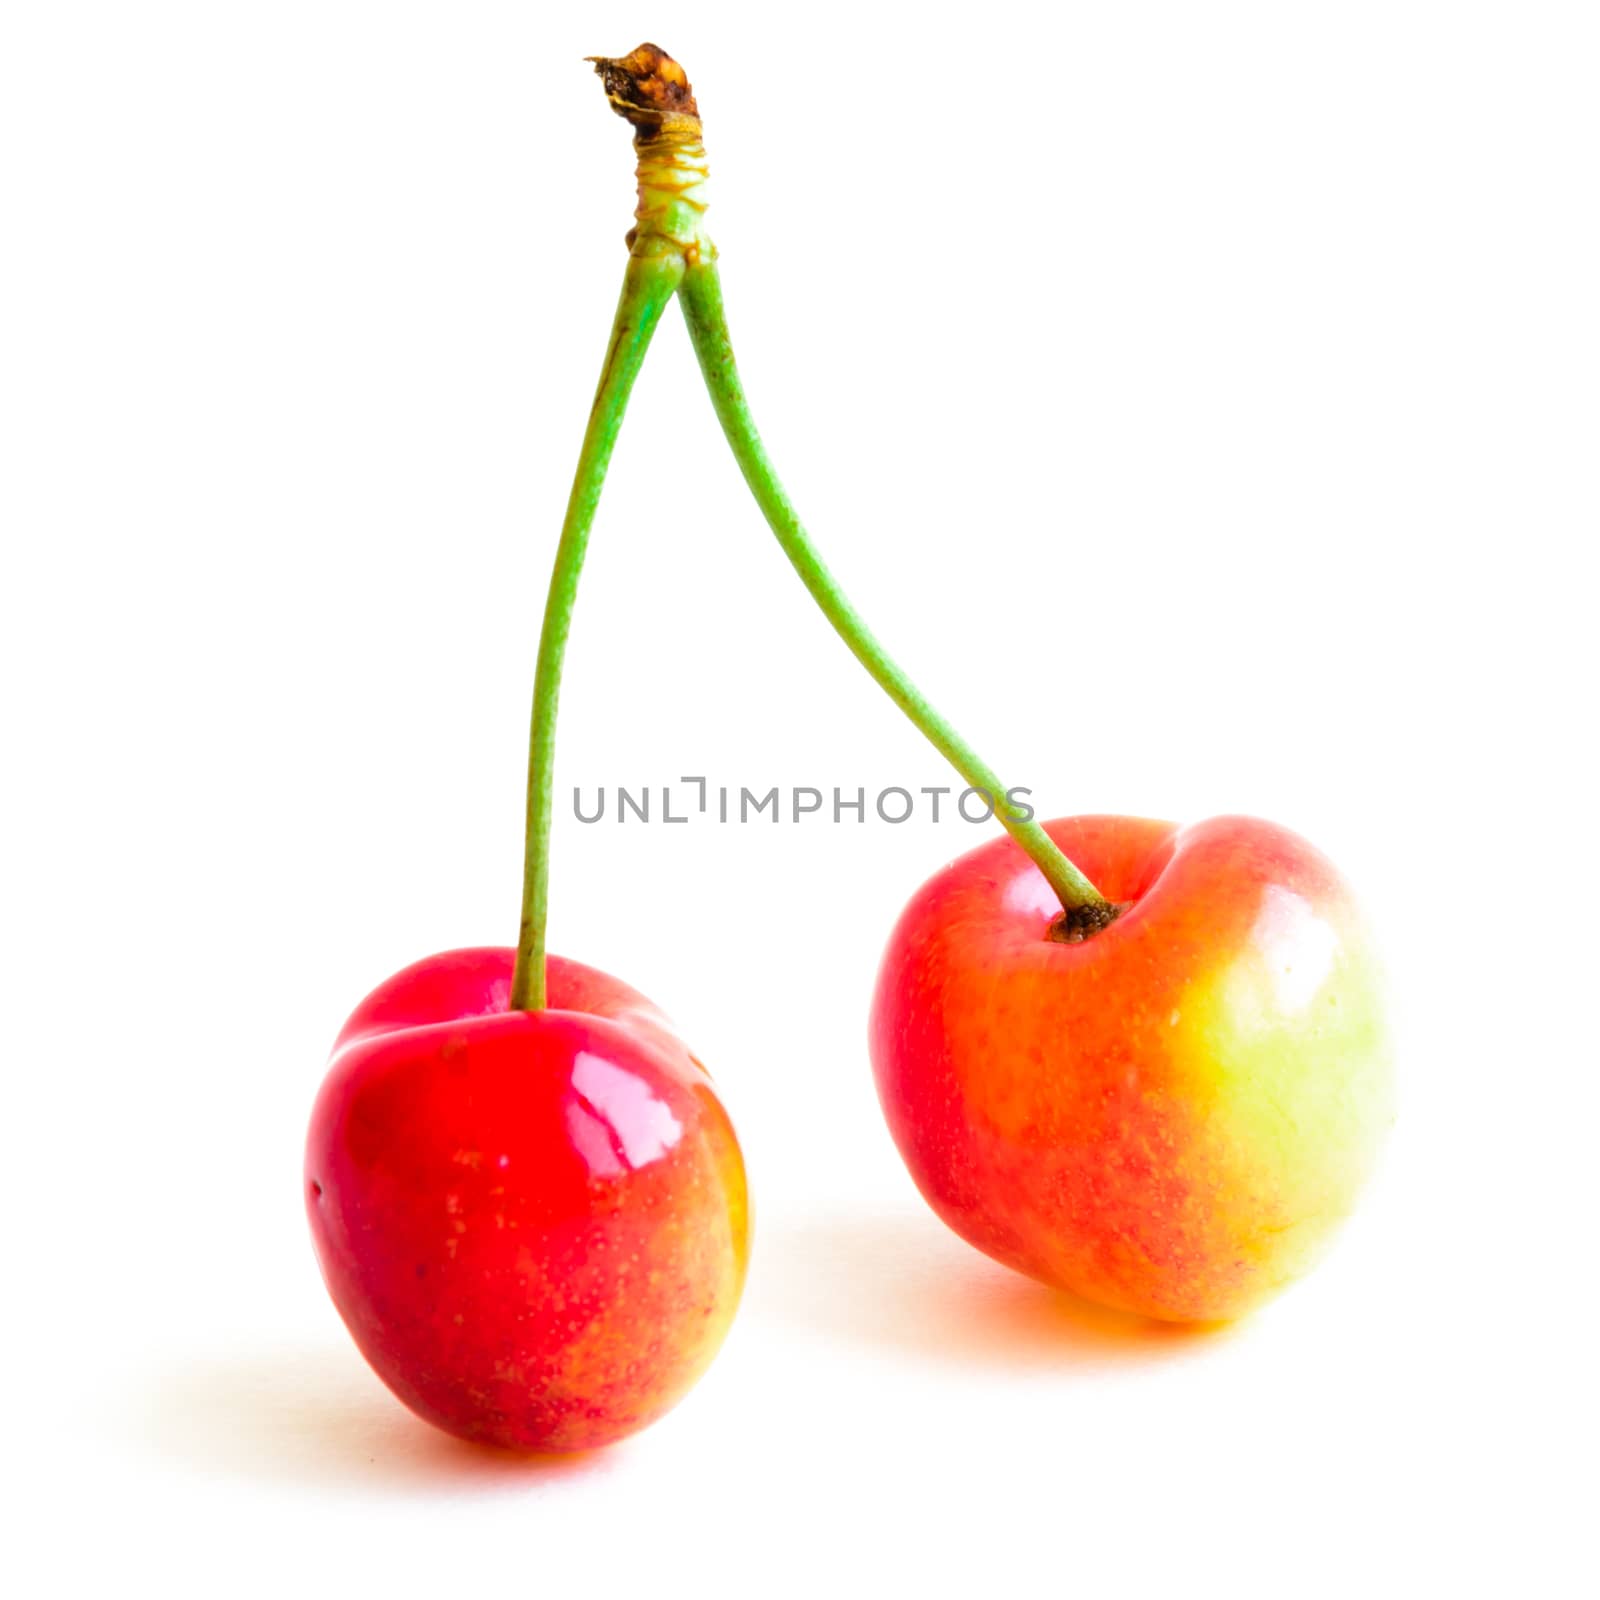 Two Rainer cherries joined with stem isolated on white background. Fresh picked organic cherries grown in Yakima Valley, Washington State, USA.